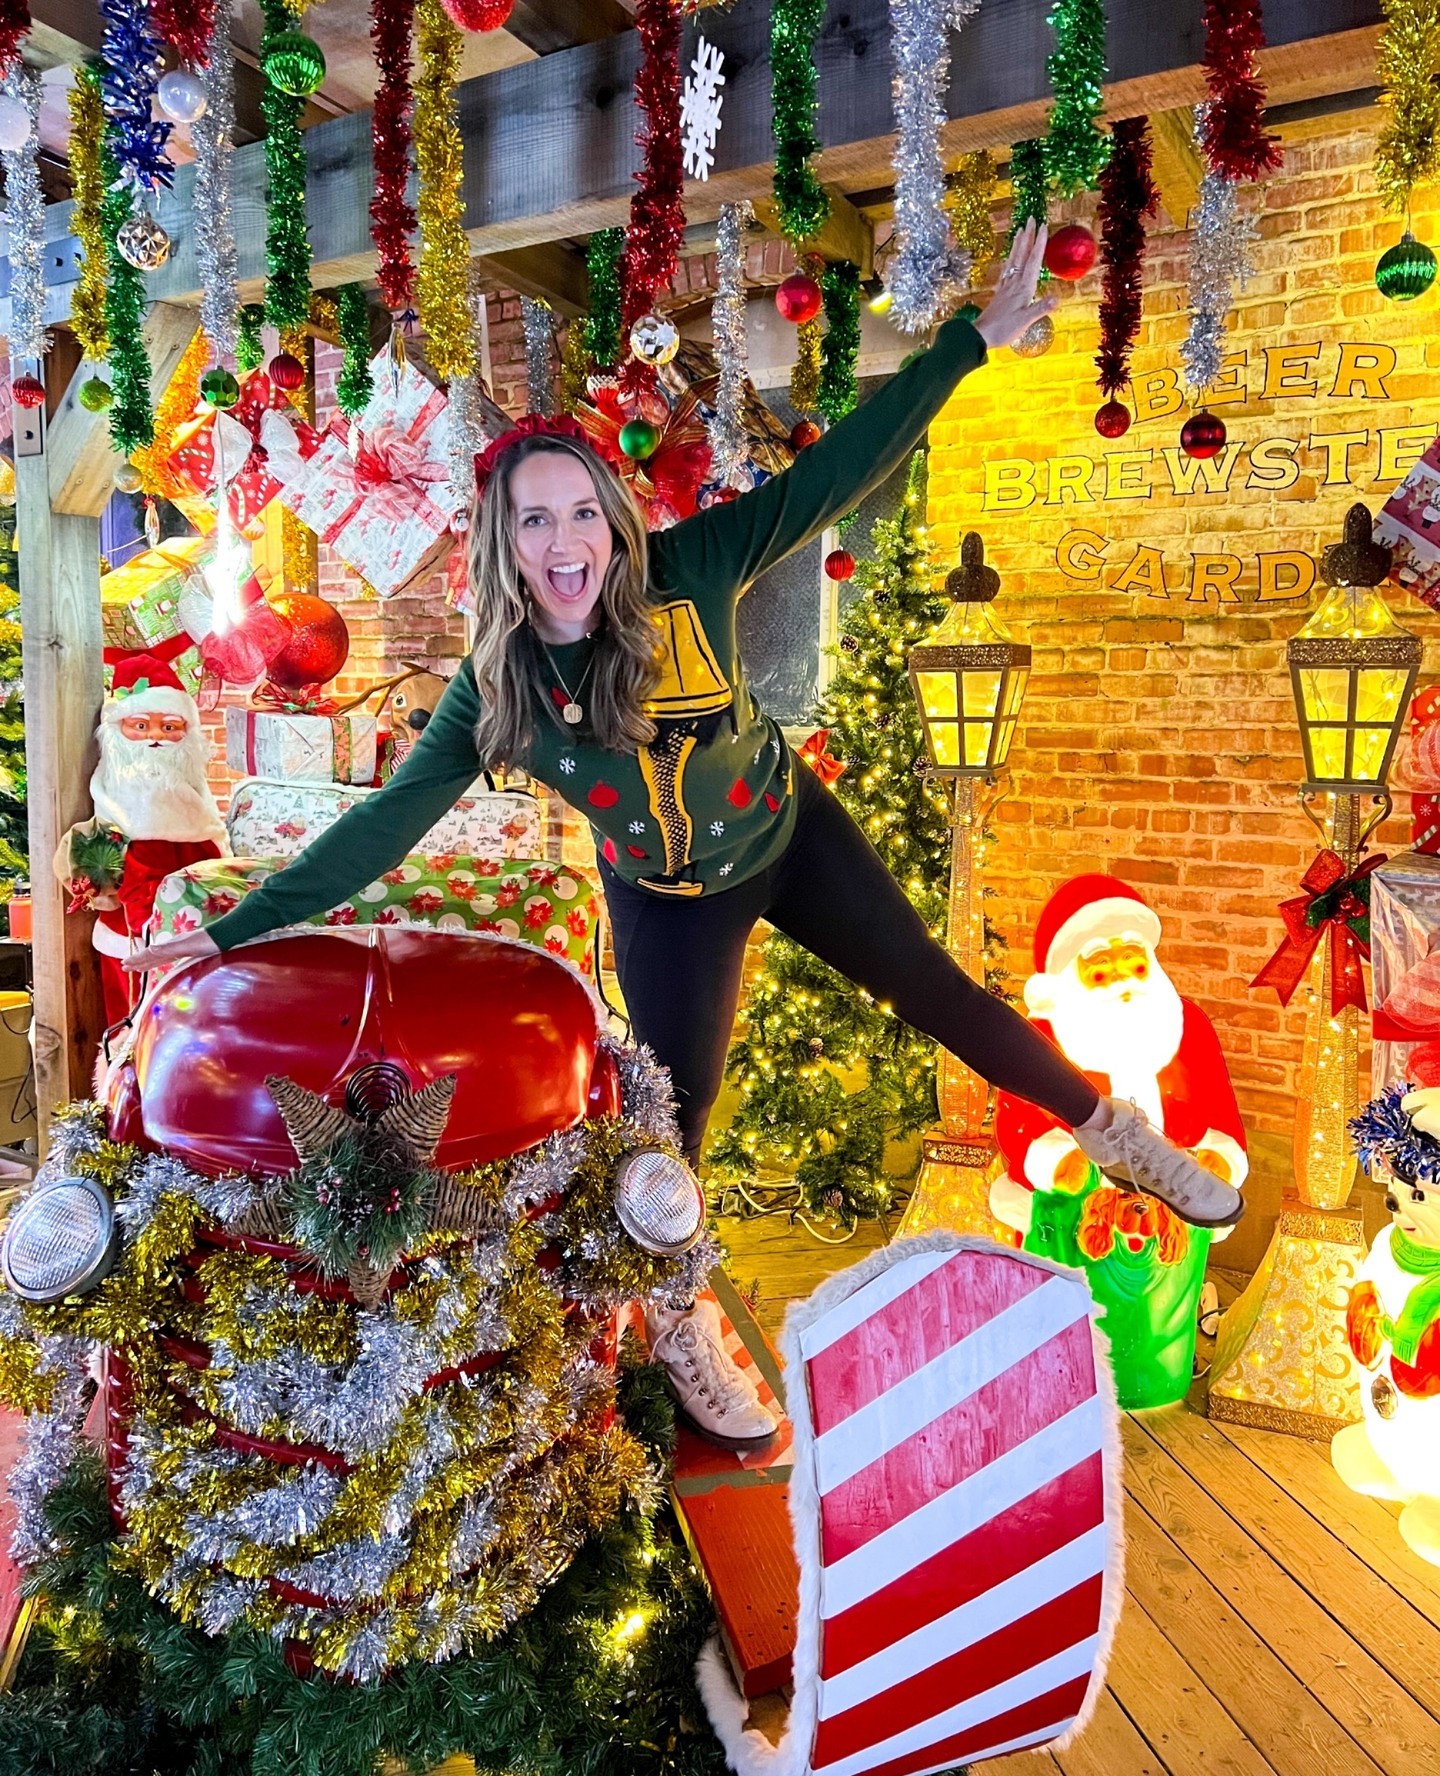 Do you love the holidays as much as our writer Christina?! Check out our list of holiday activities at FabulousCalifornia.com